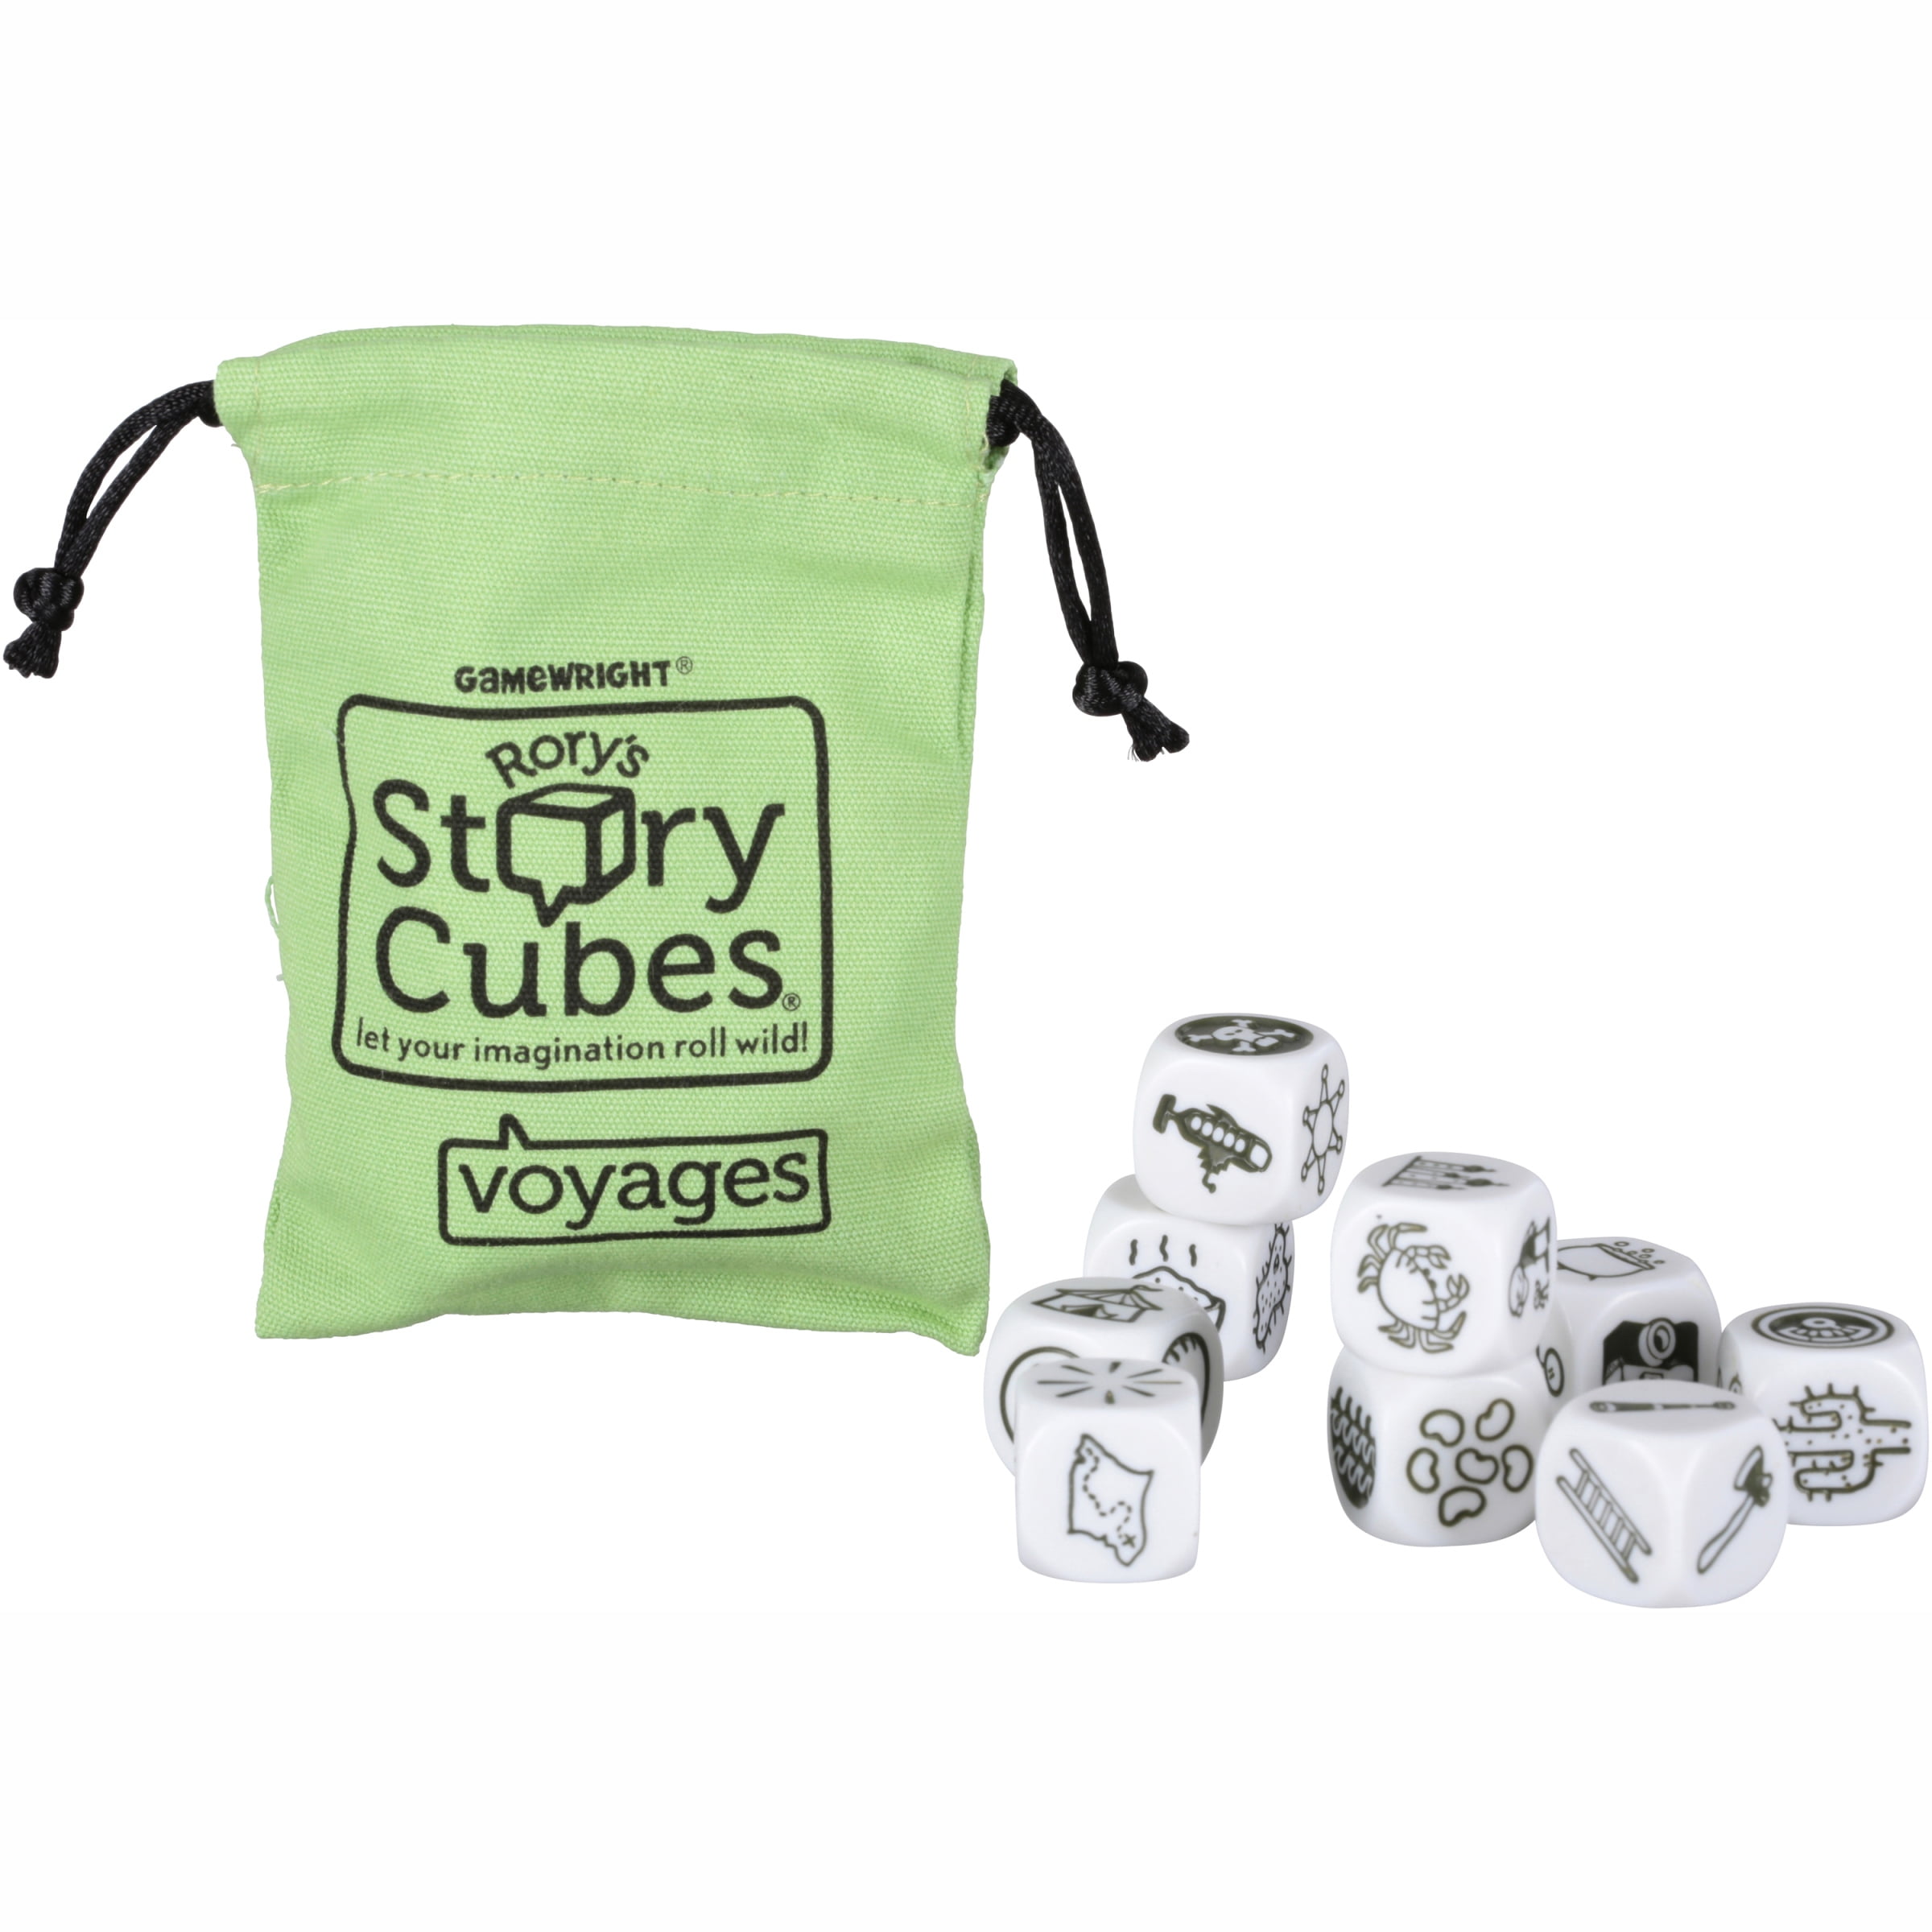 by Ceaco Gamewright RORY'S STORY CUBES Actions Storytelling Dice Game 